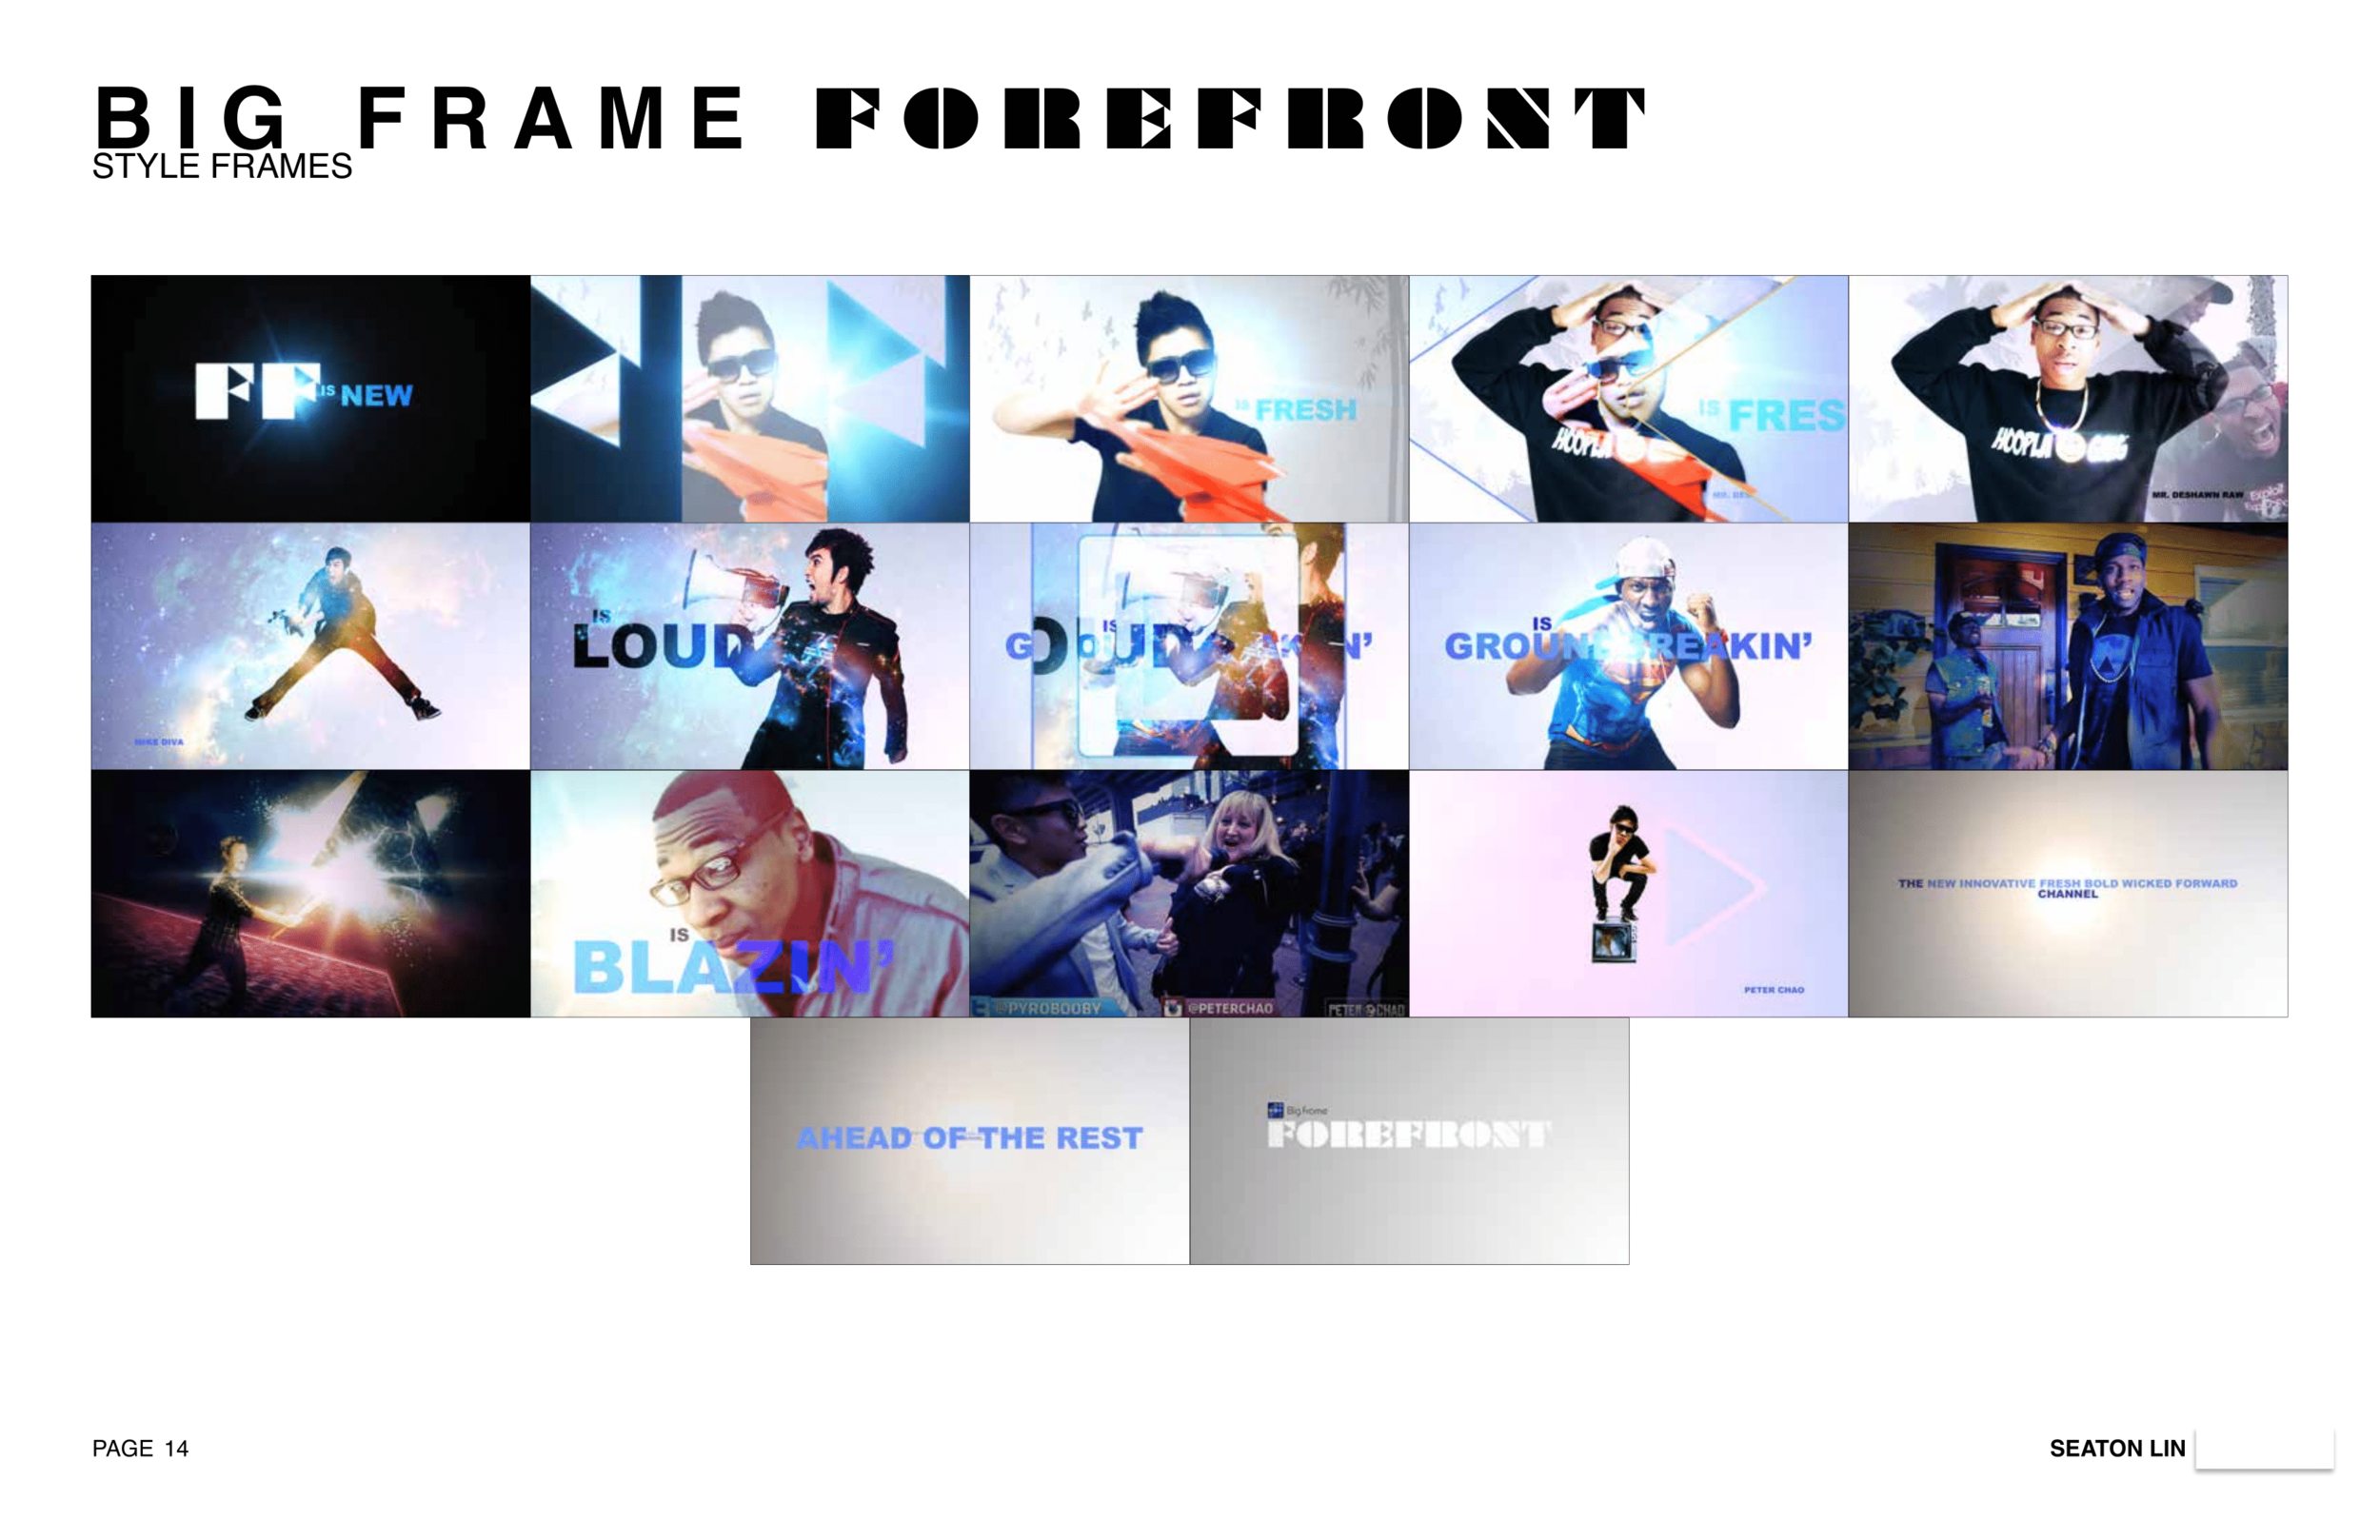 BigFrame_ForeFront_Treatment_SeatonLin-14.png